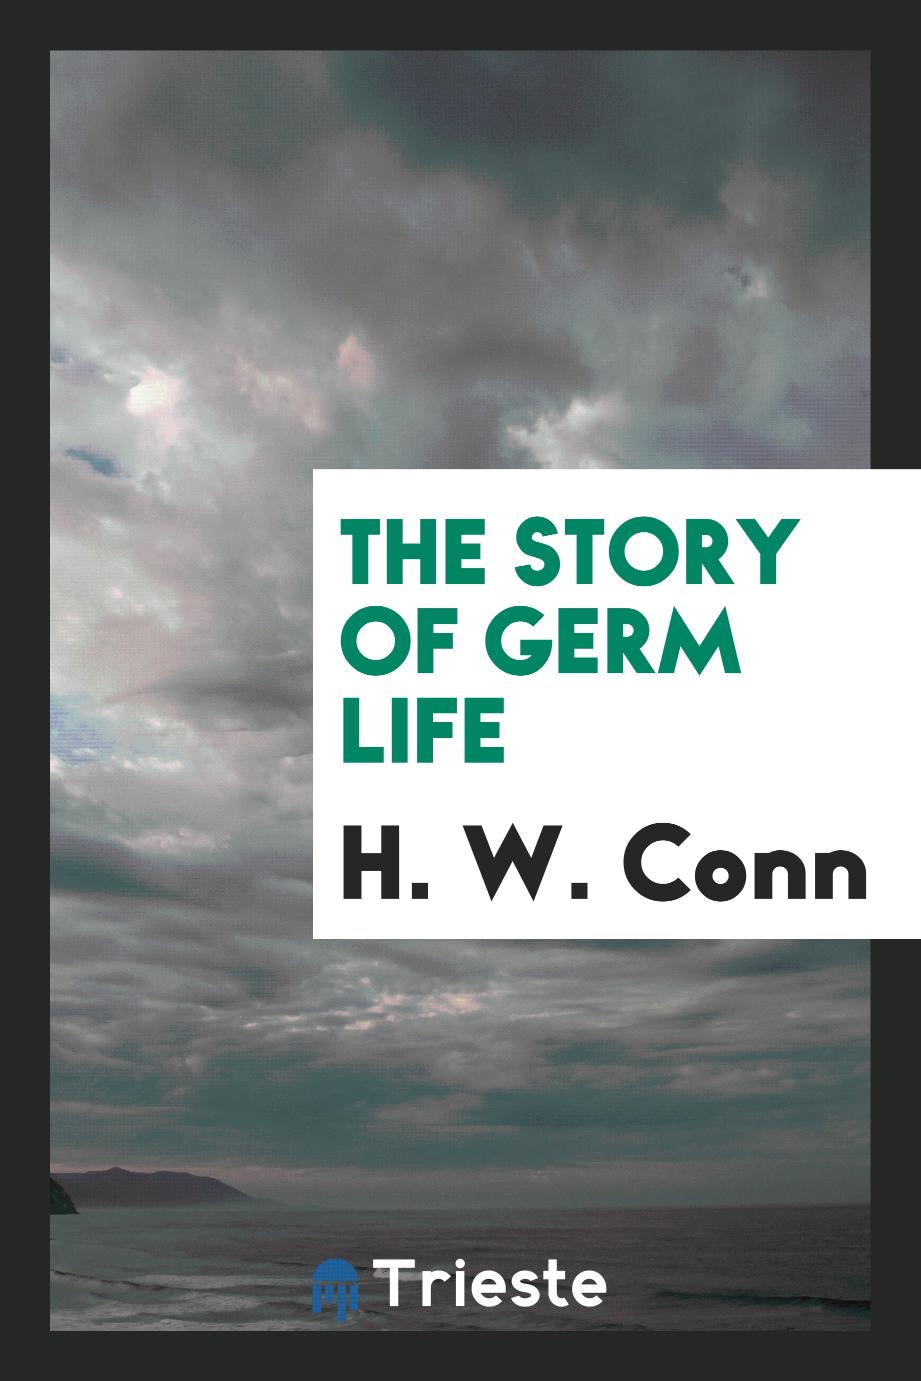 H. W. Conn - The story of germ life